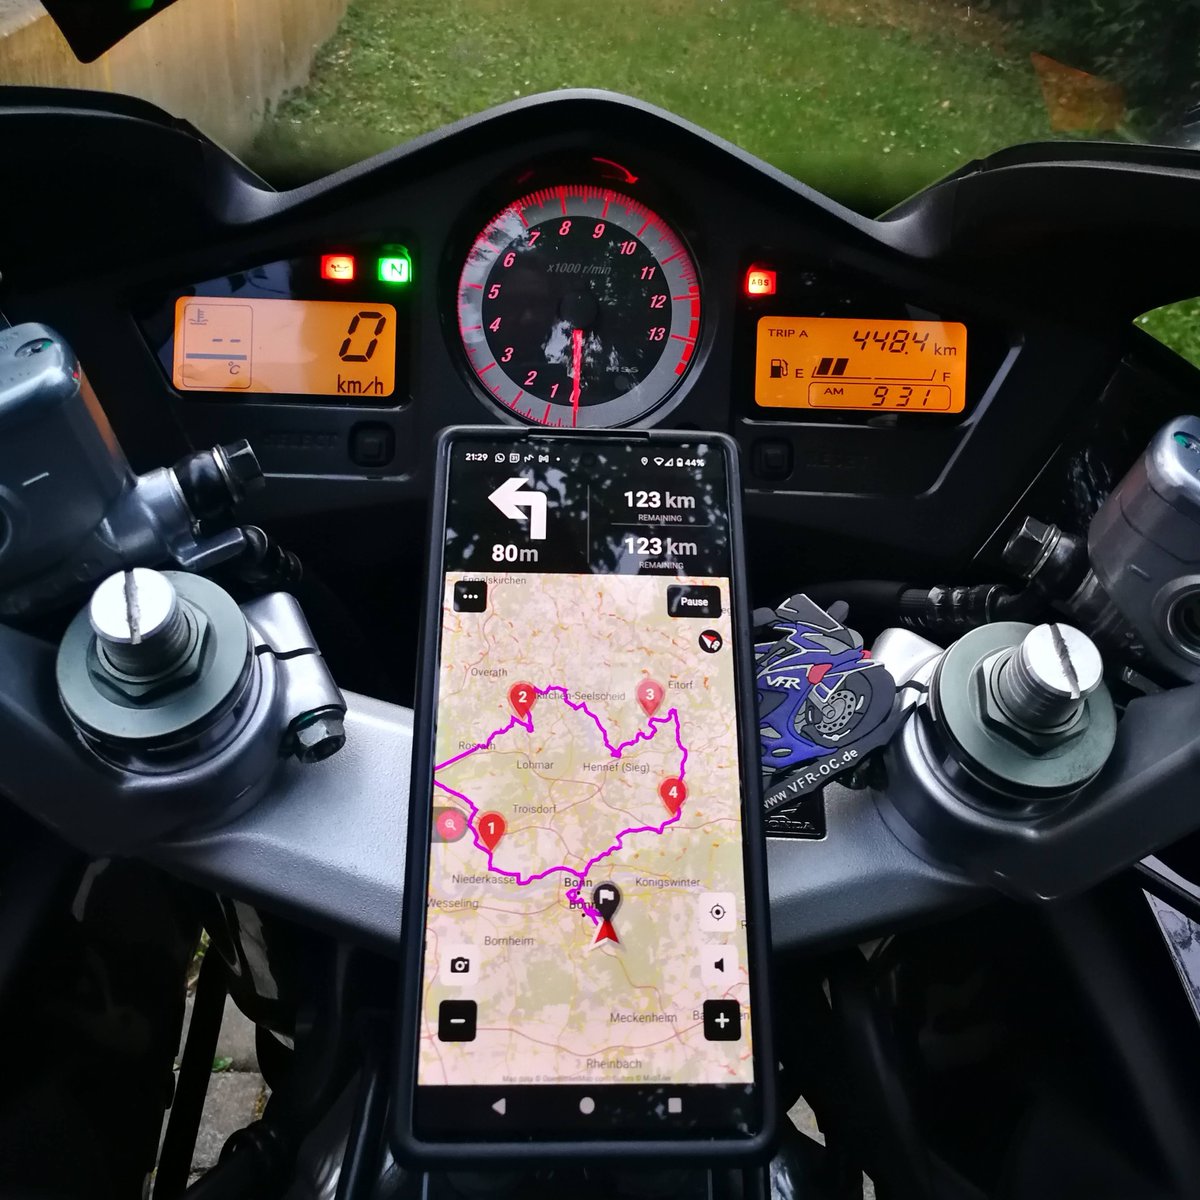 Motorcyclists, I reviewed the Calimoto routing and tracking app after 4500km of usage. Recommended? Yes! #calimotour meetmobility.com/reviews/calimo…